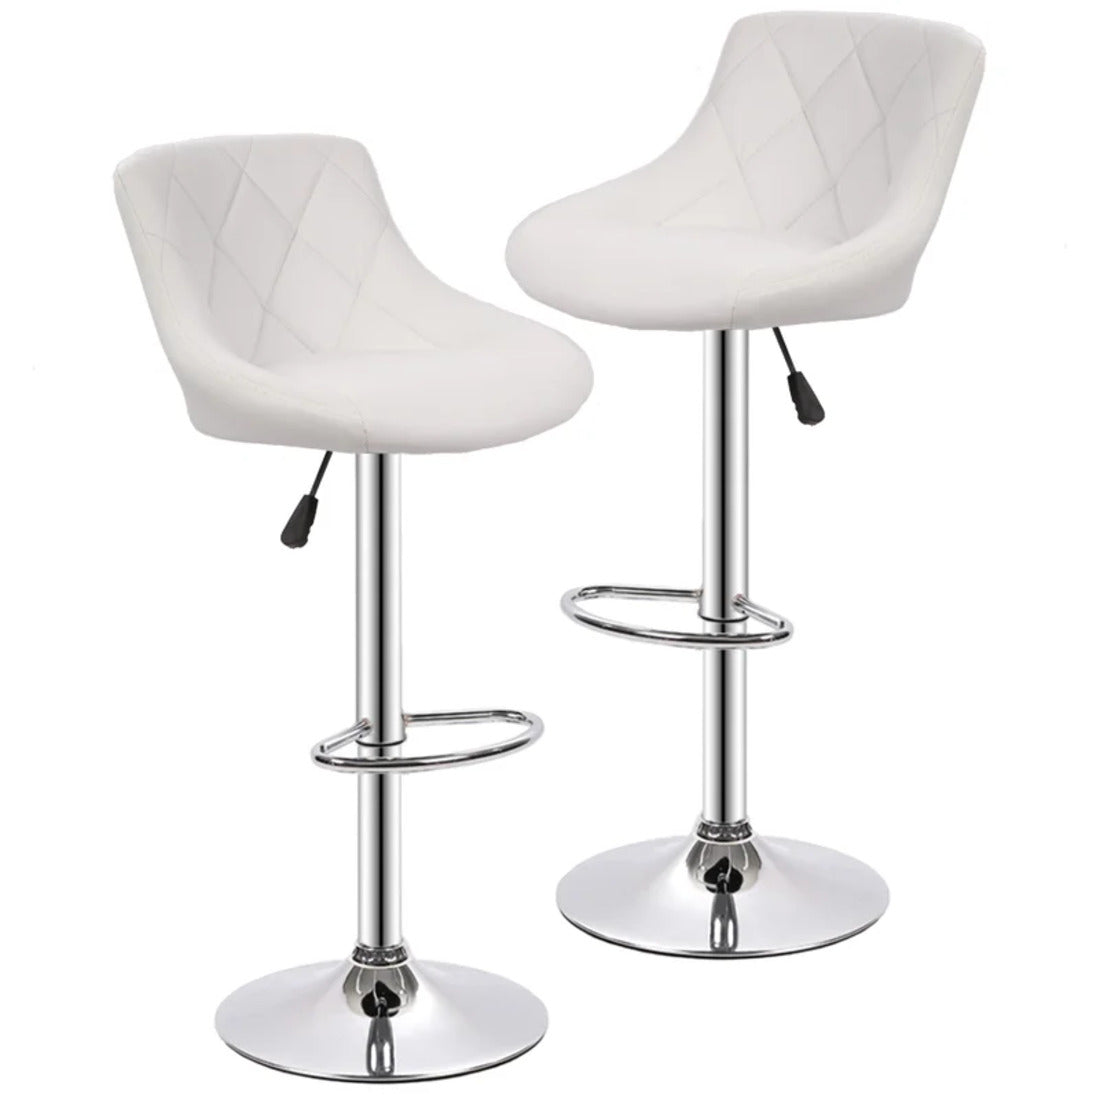 Easy Back Rest White Comfy Leatherette Bar Stool / Long Chair